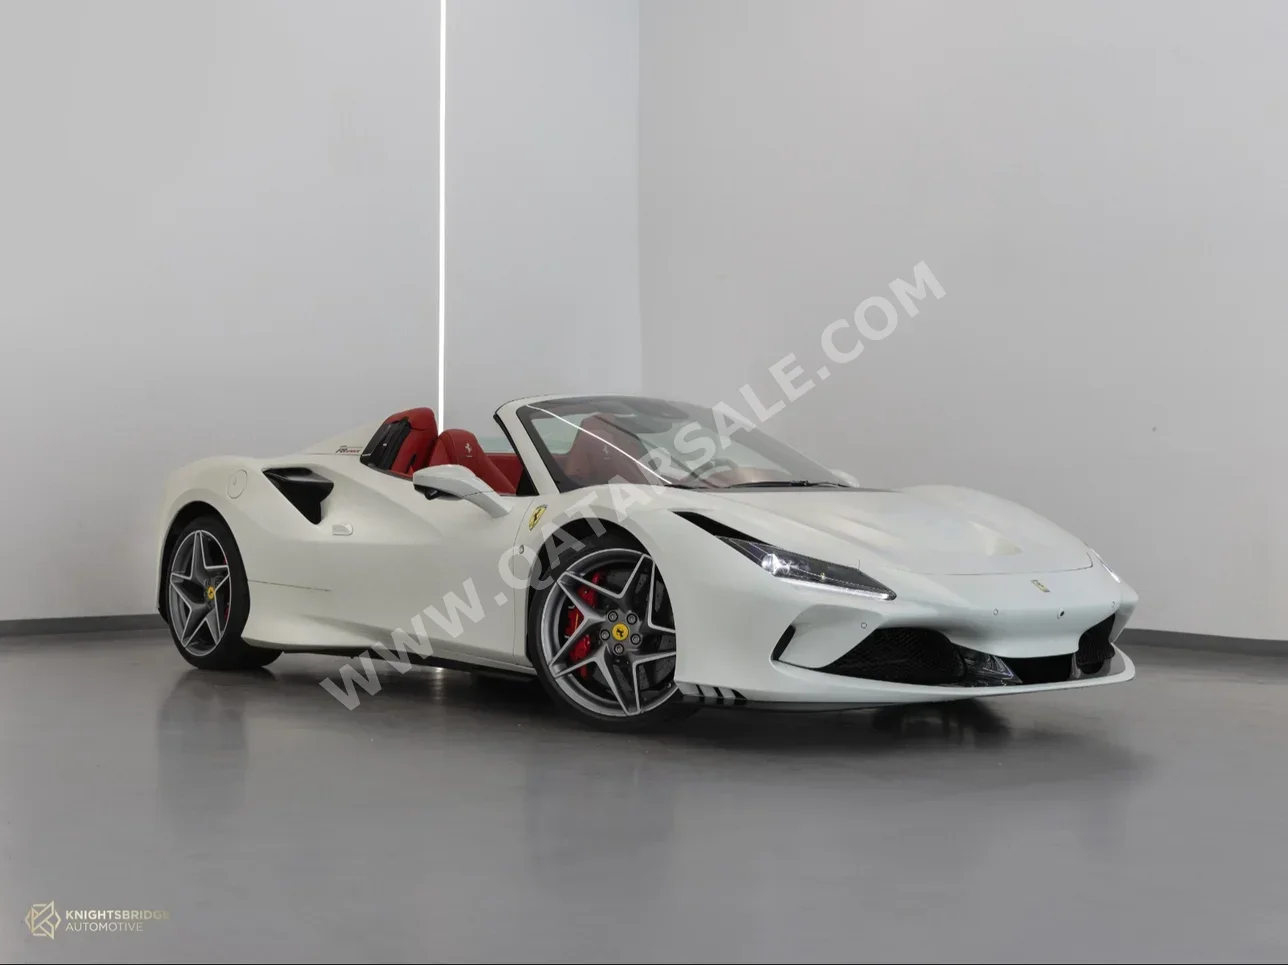  Ferrari  F8  Spider  2022  Automatic  8,050 Km  8 Cylinder  Rear Wheel Drive (RWD)  Convertible  White  With Warranty